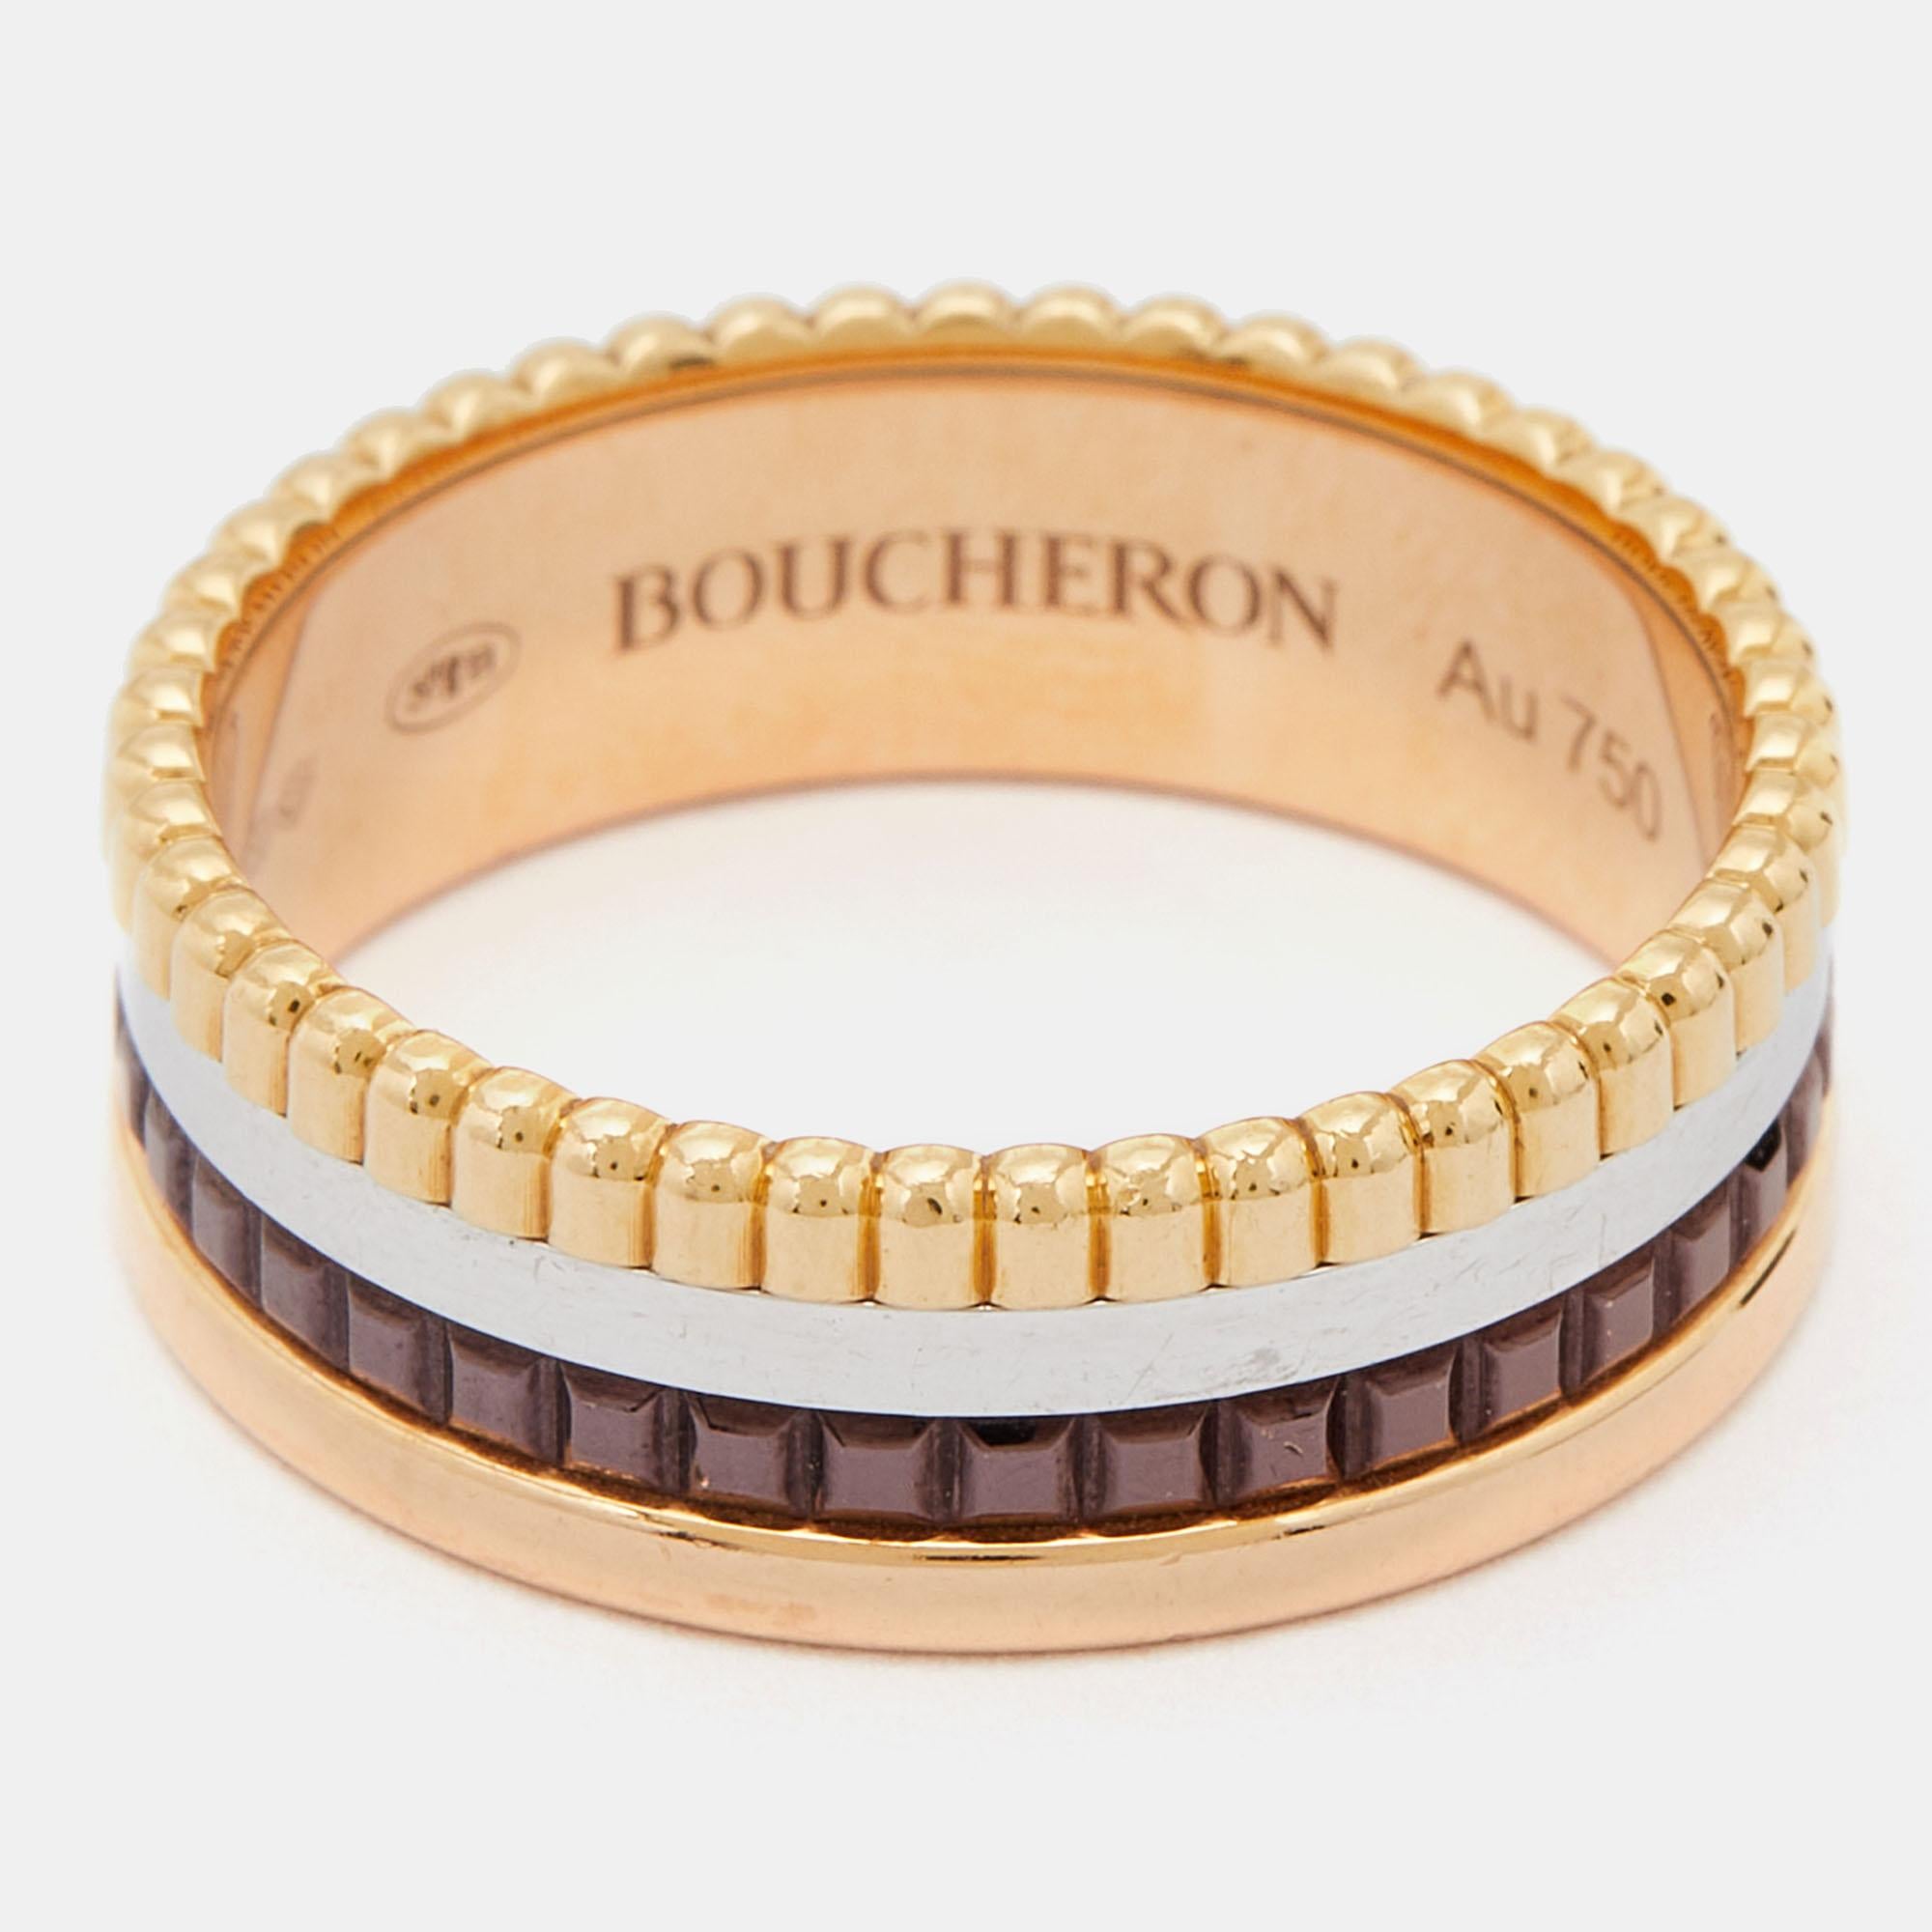 Boucheron's Quatre collection beautifully presents the spirit of the brand, exemplifying craftsmanship and an intricate play of textures and gold. The Quatre Classique collection gifts you this ring arranged preciously in 18k white, yellow, rose